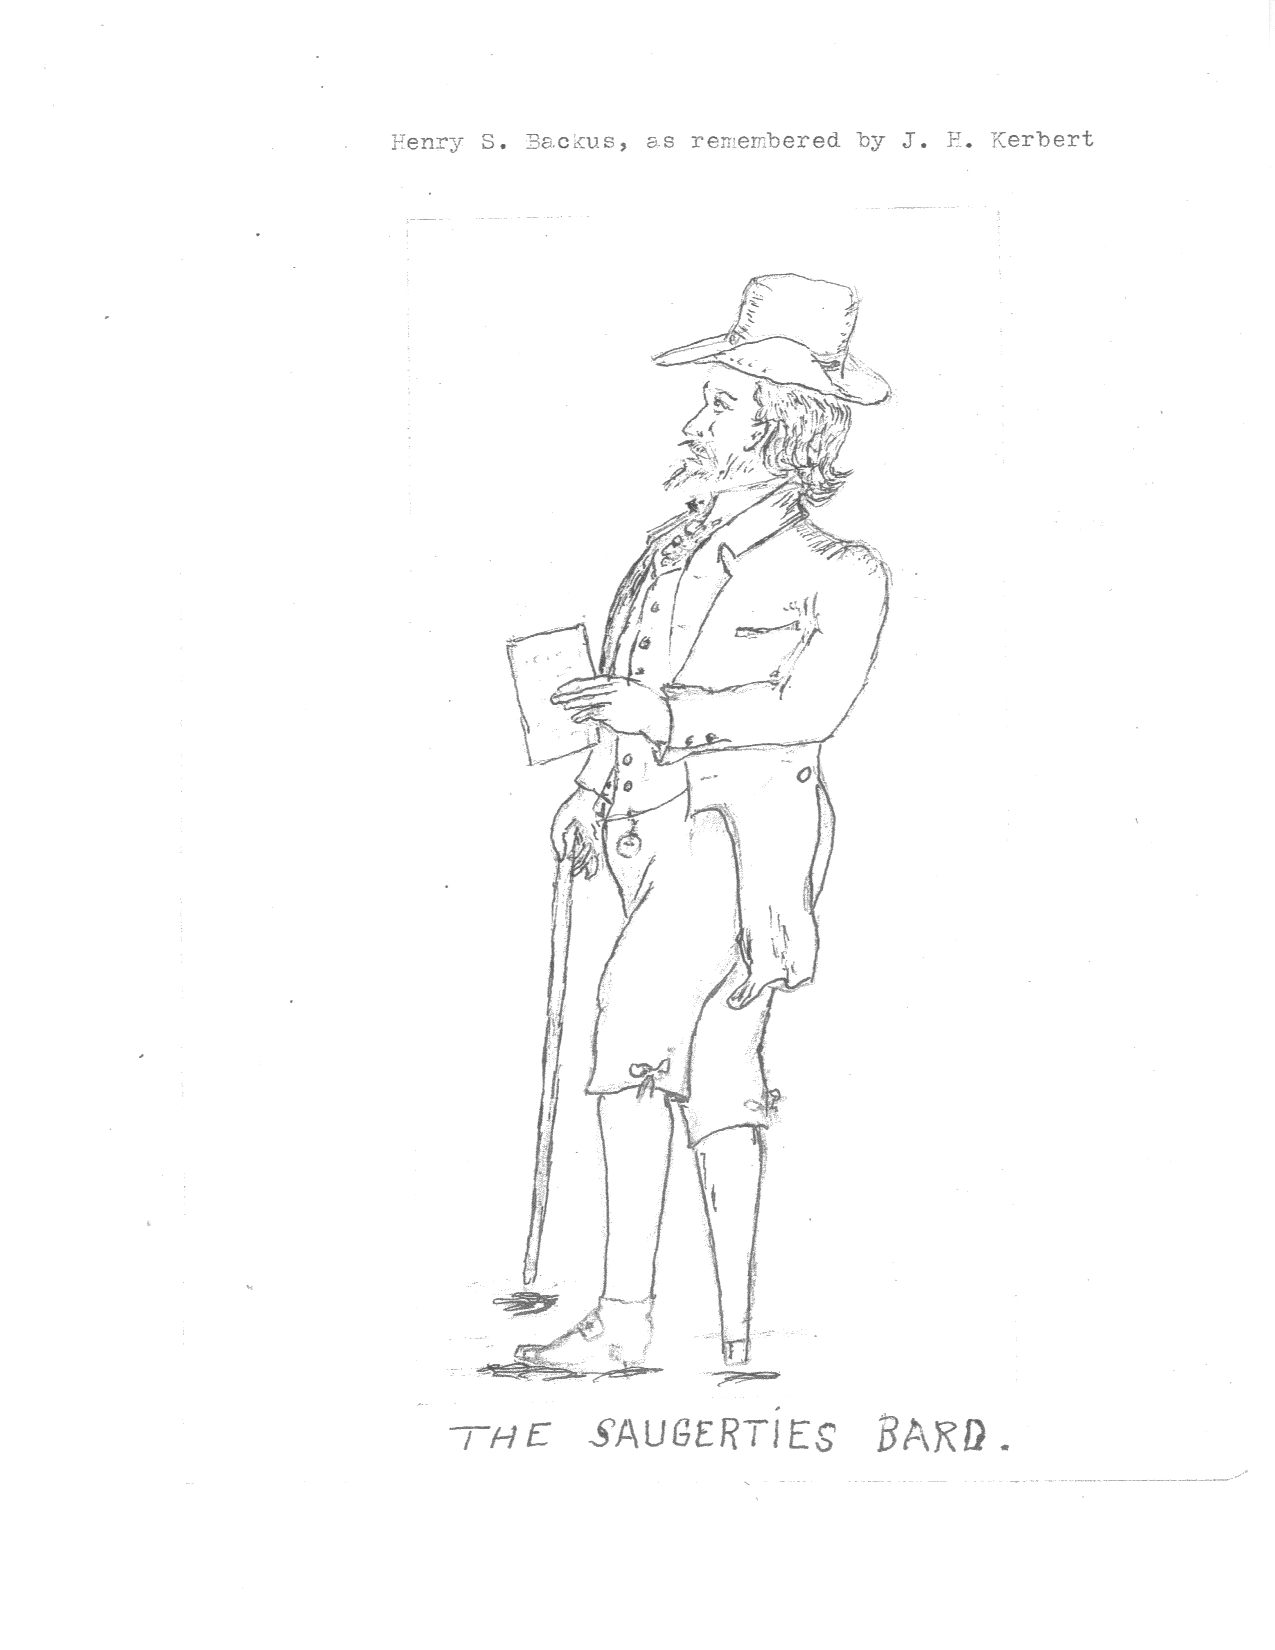 A Sketch of Henry Backus, the Saugerties bard